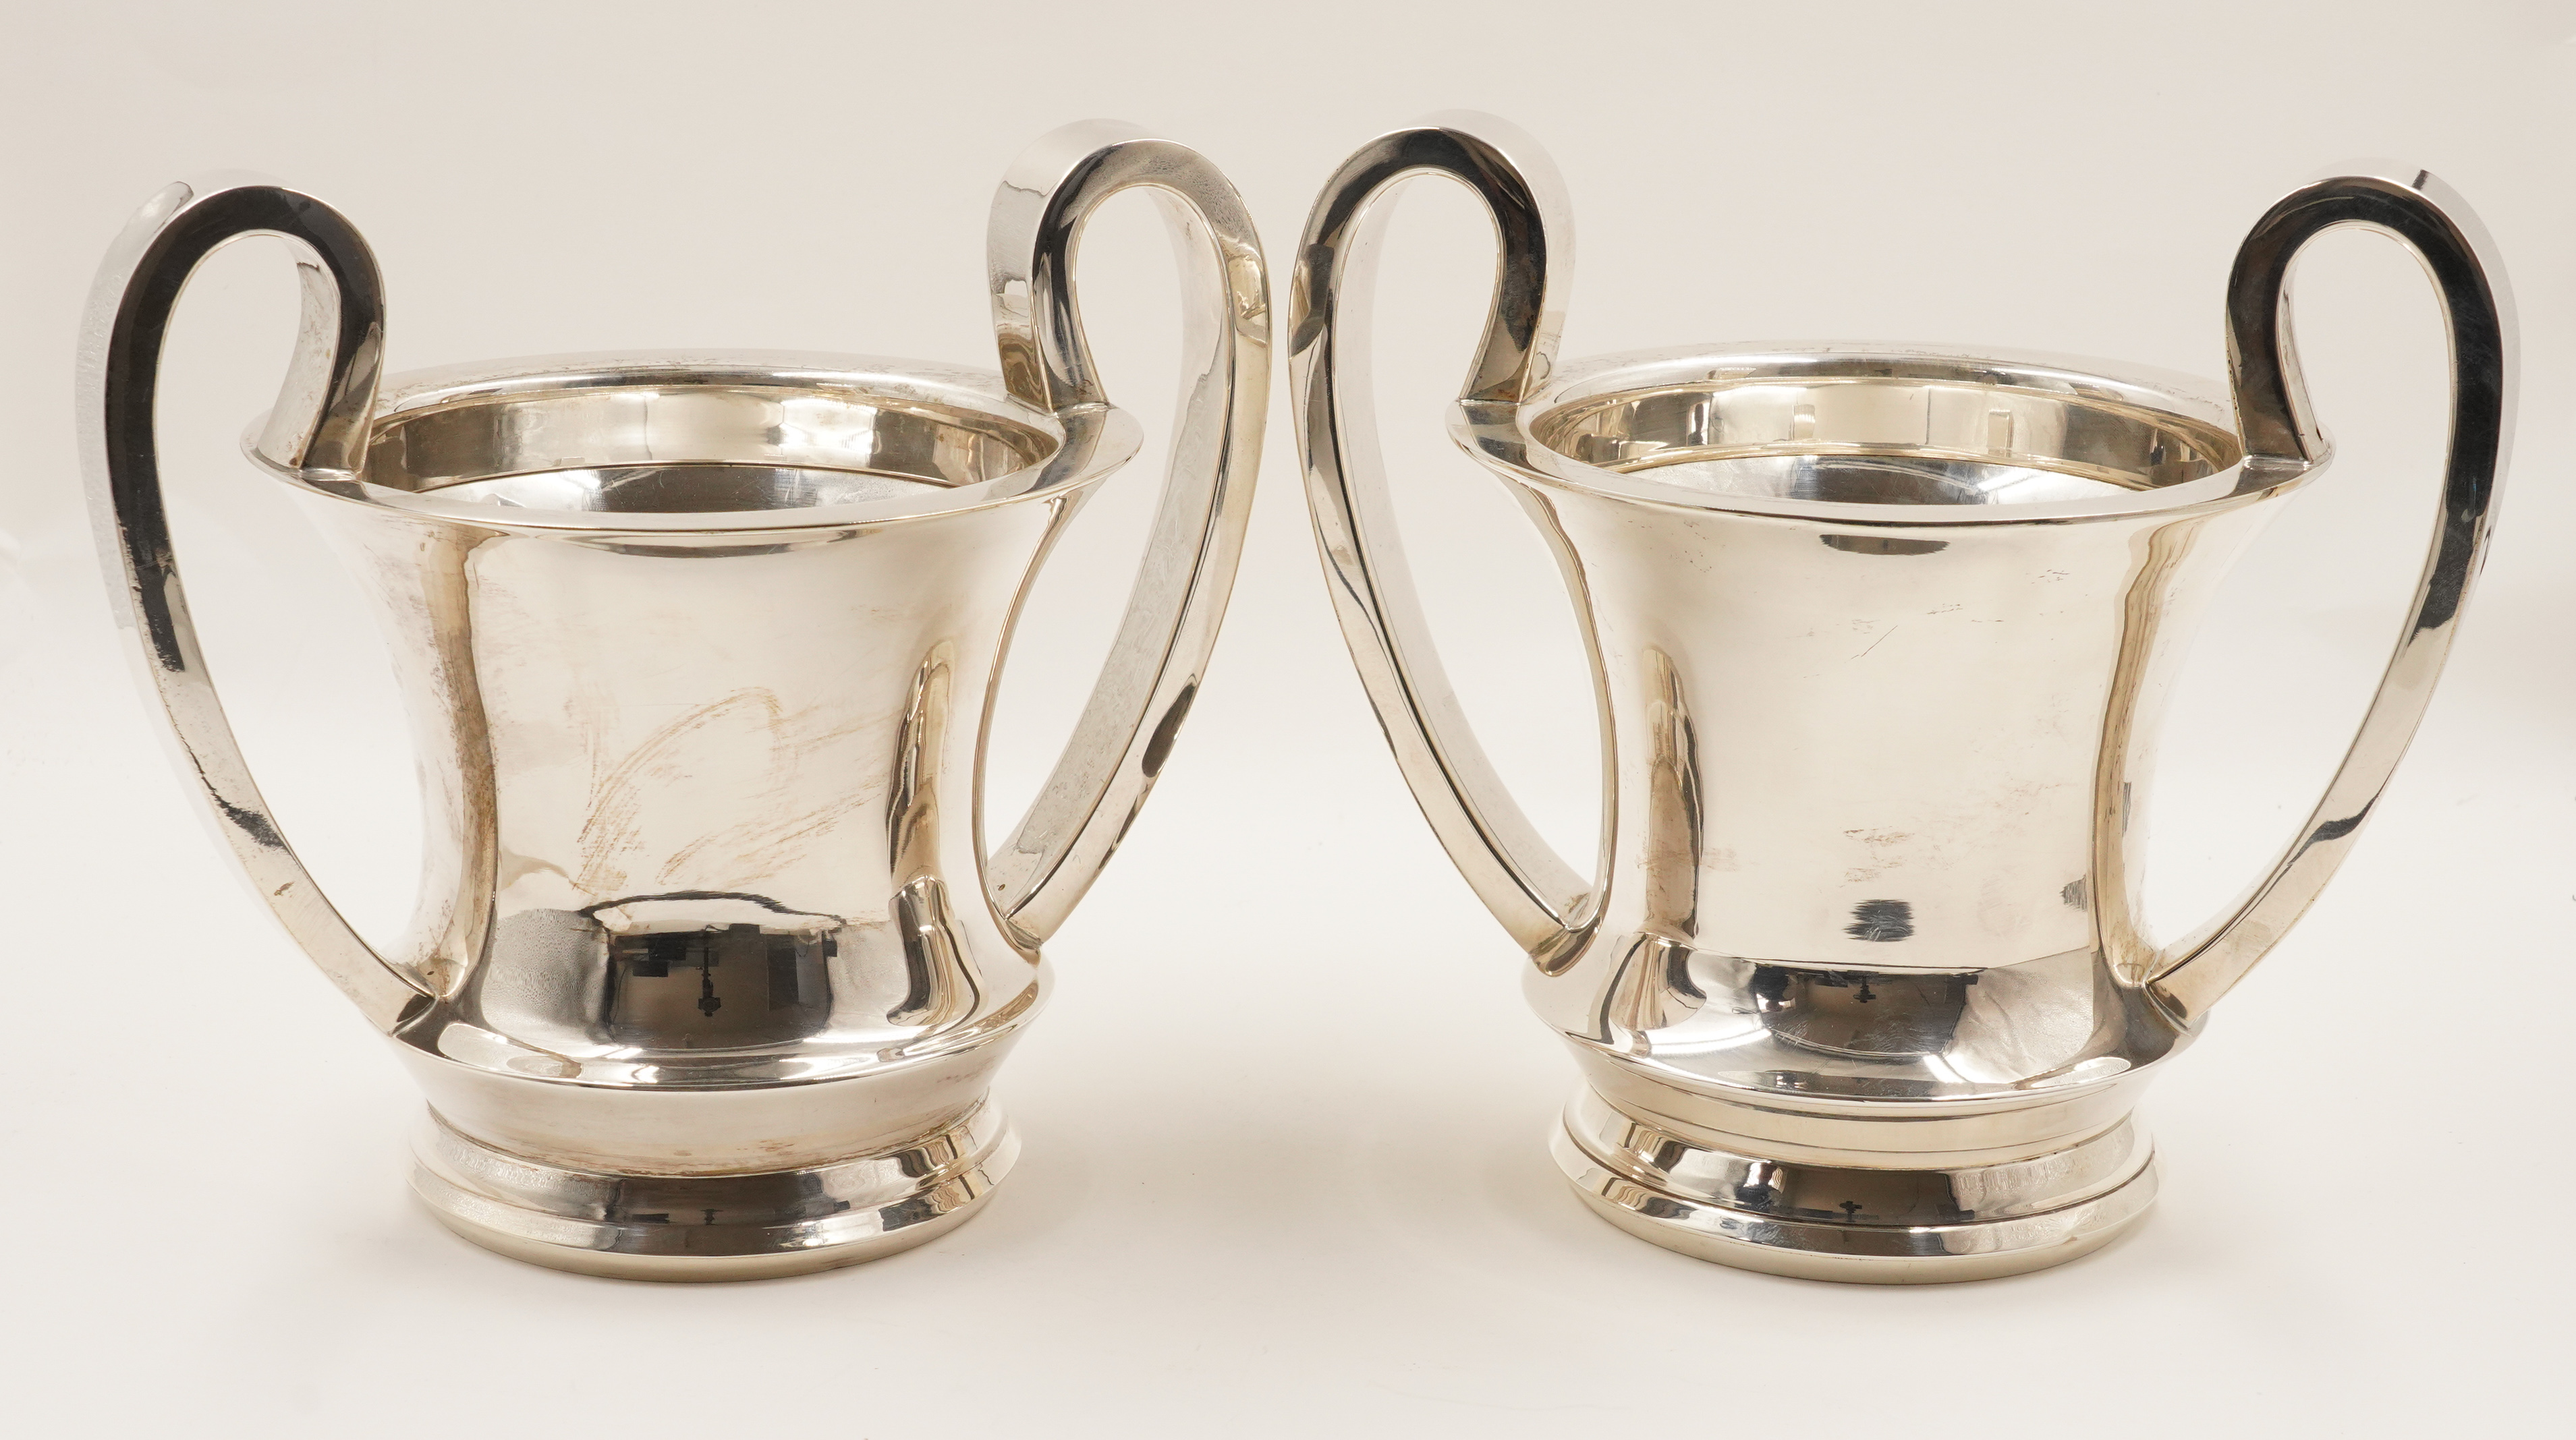 A PAIR OF SILVER TWIN HANDLED WINE BOTTLE STANDS